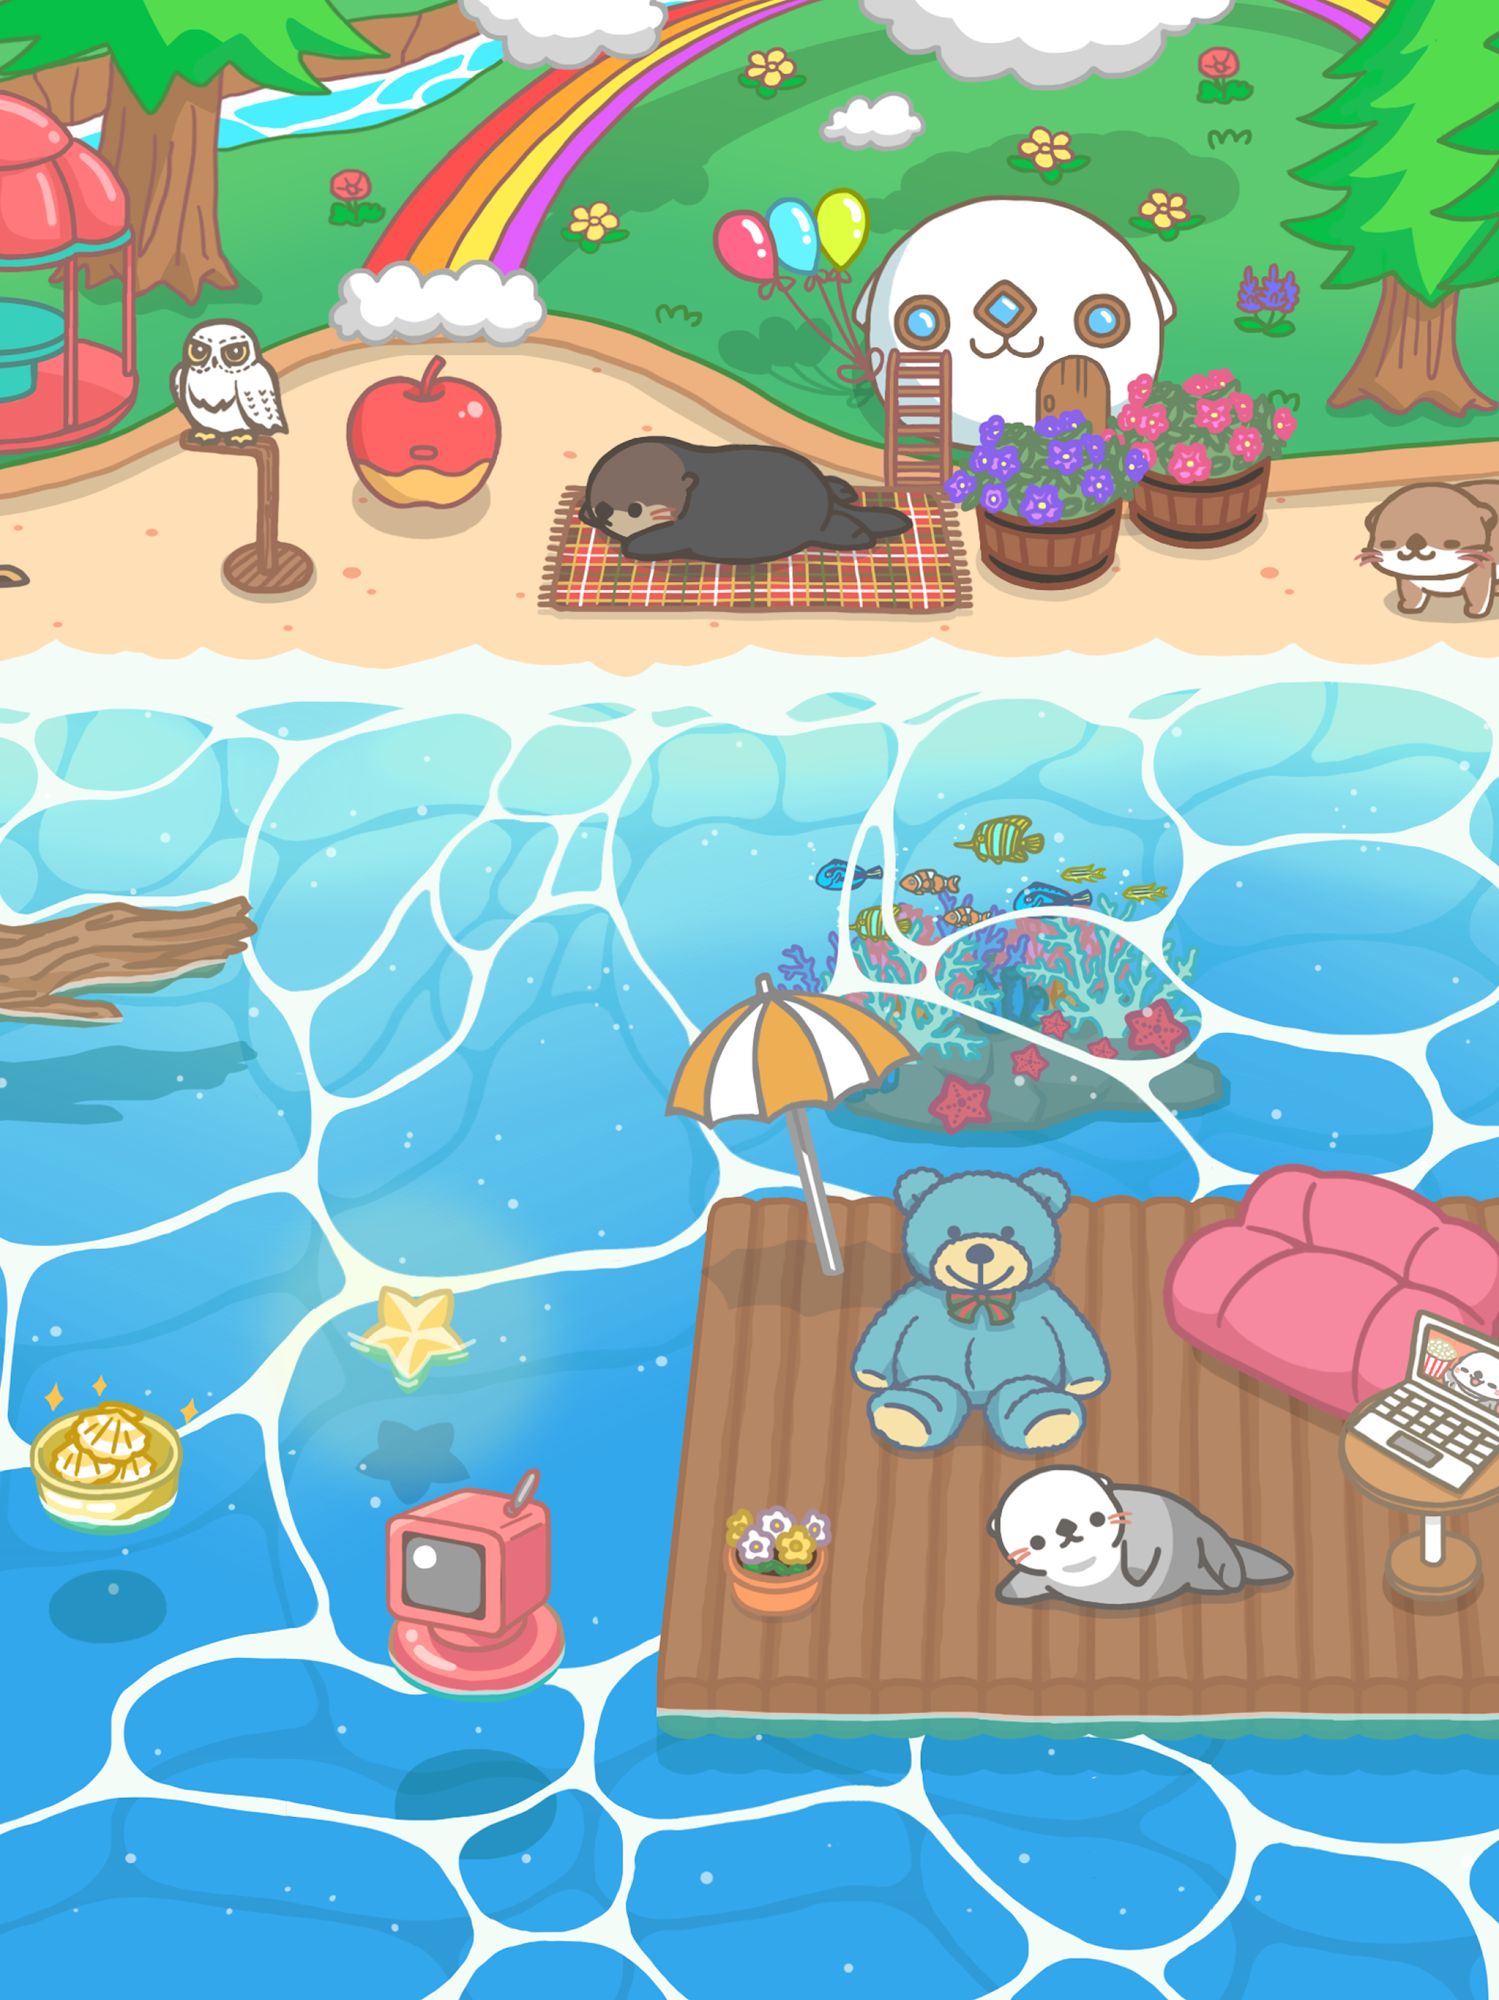 Rakko Ukabe - Let's call cute sea otters! for Android